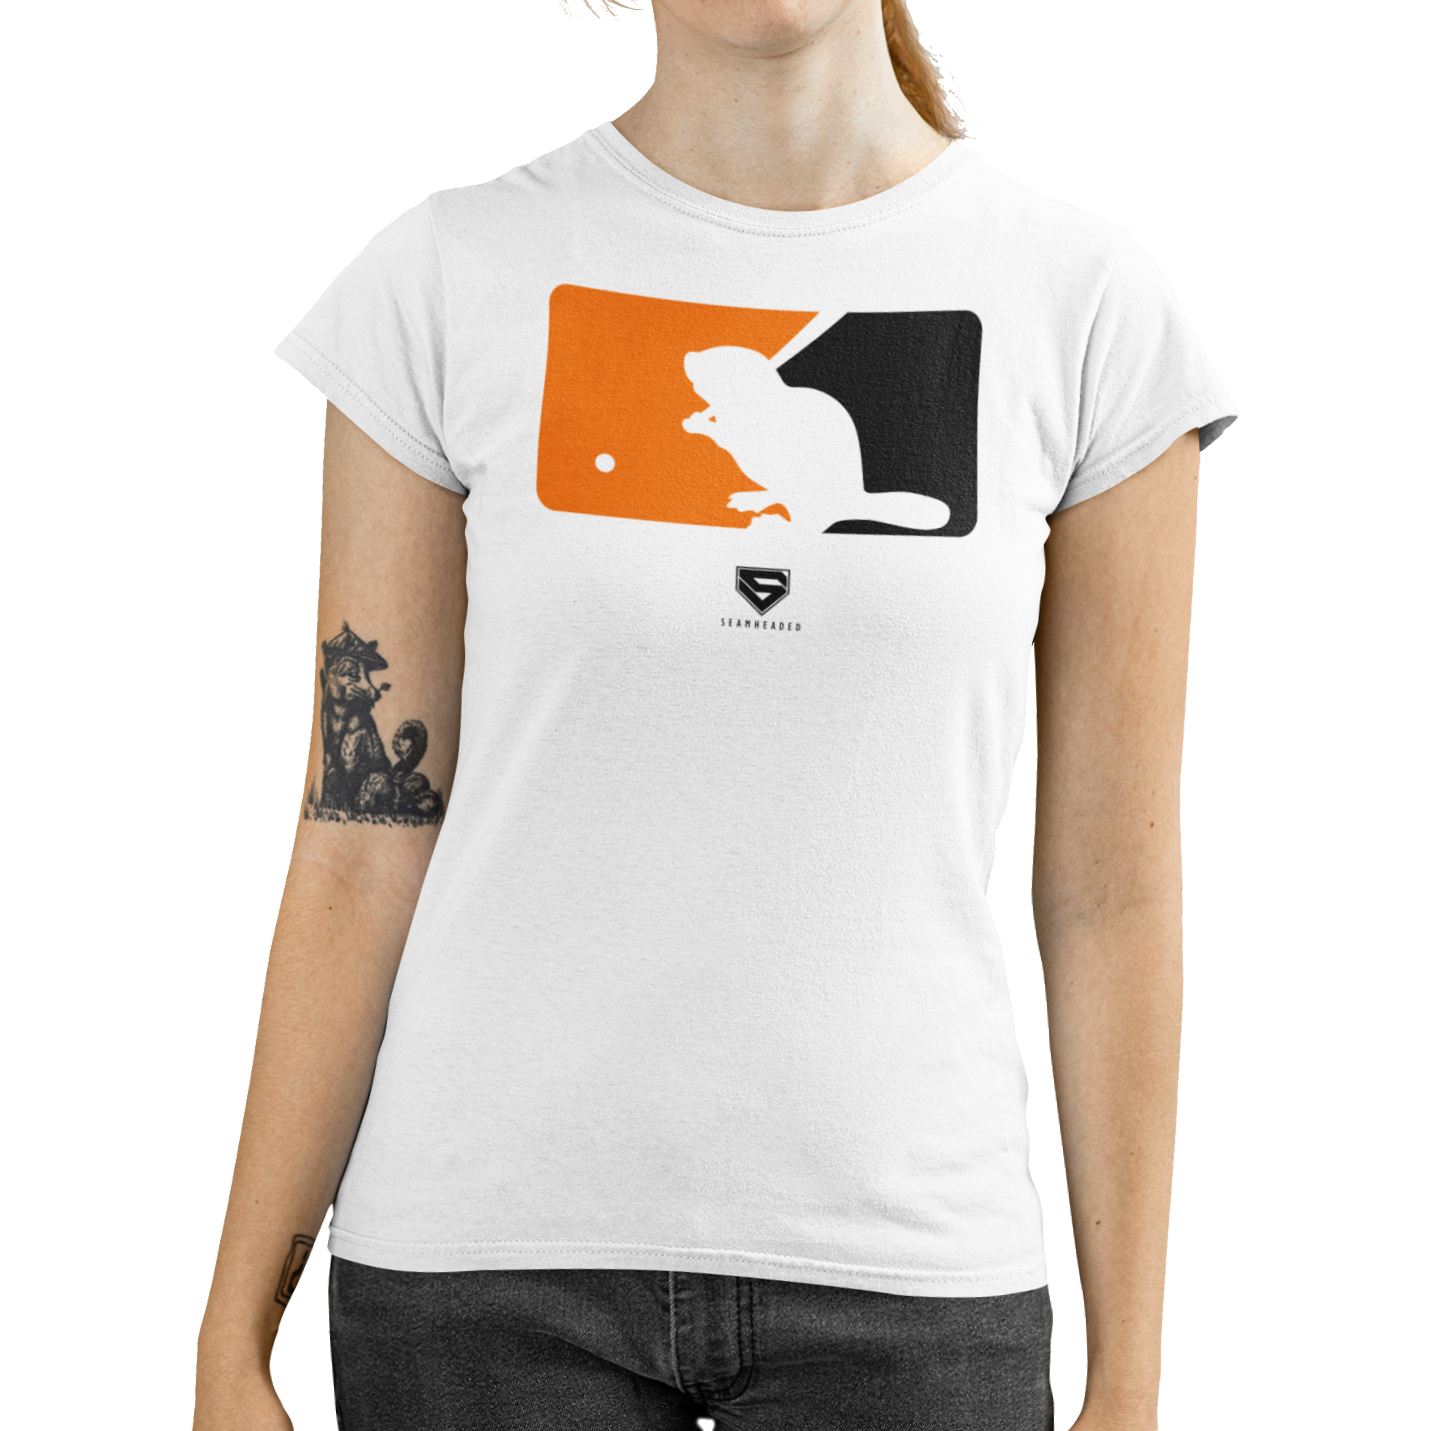 The League Women's Tee from Seamheaded Apparel